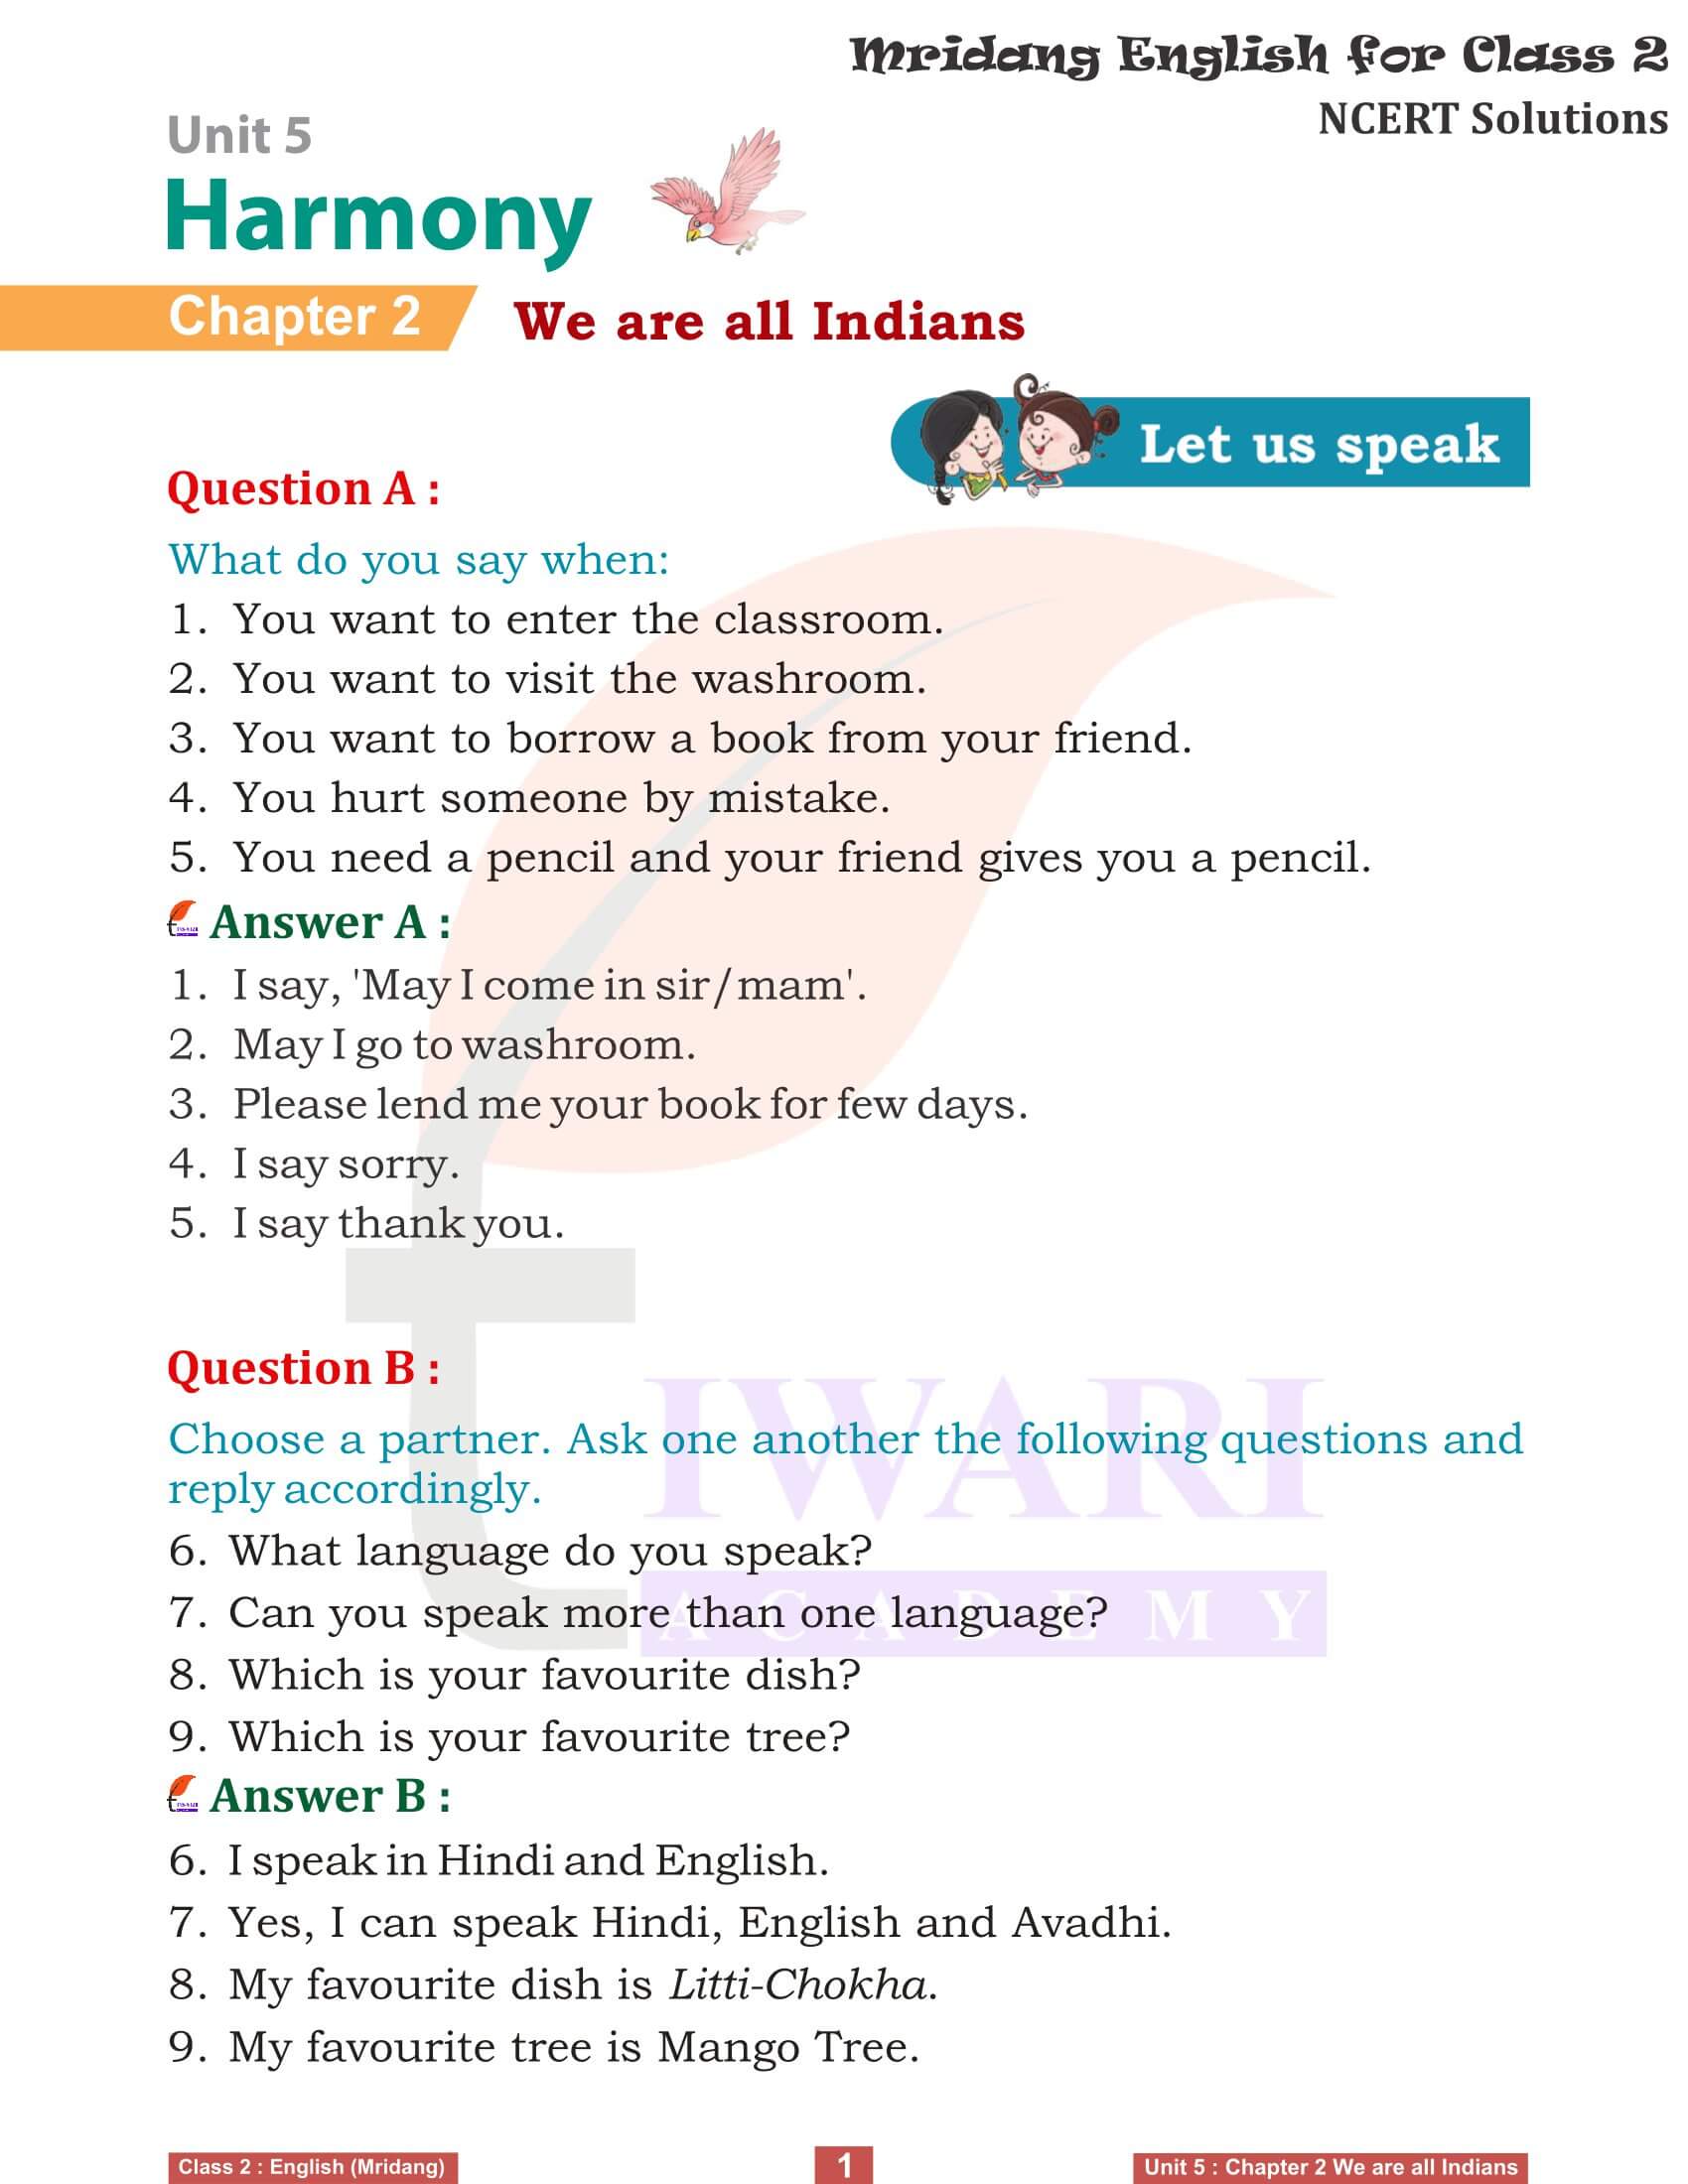 NCERT Solutions for Class 2 English Mridang Unit 5 Harmony Chapter 2 We are all Indians